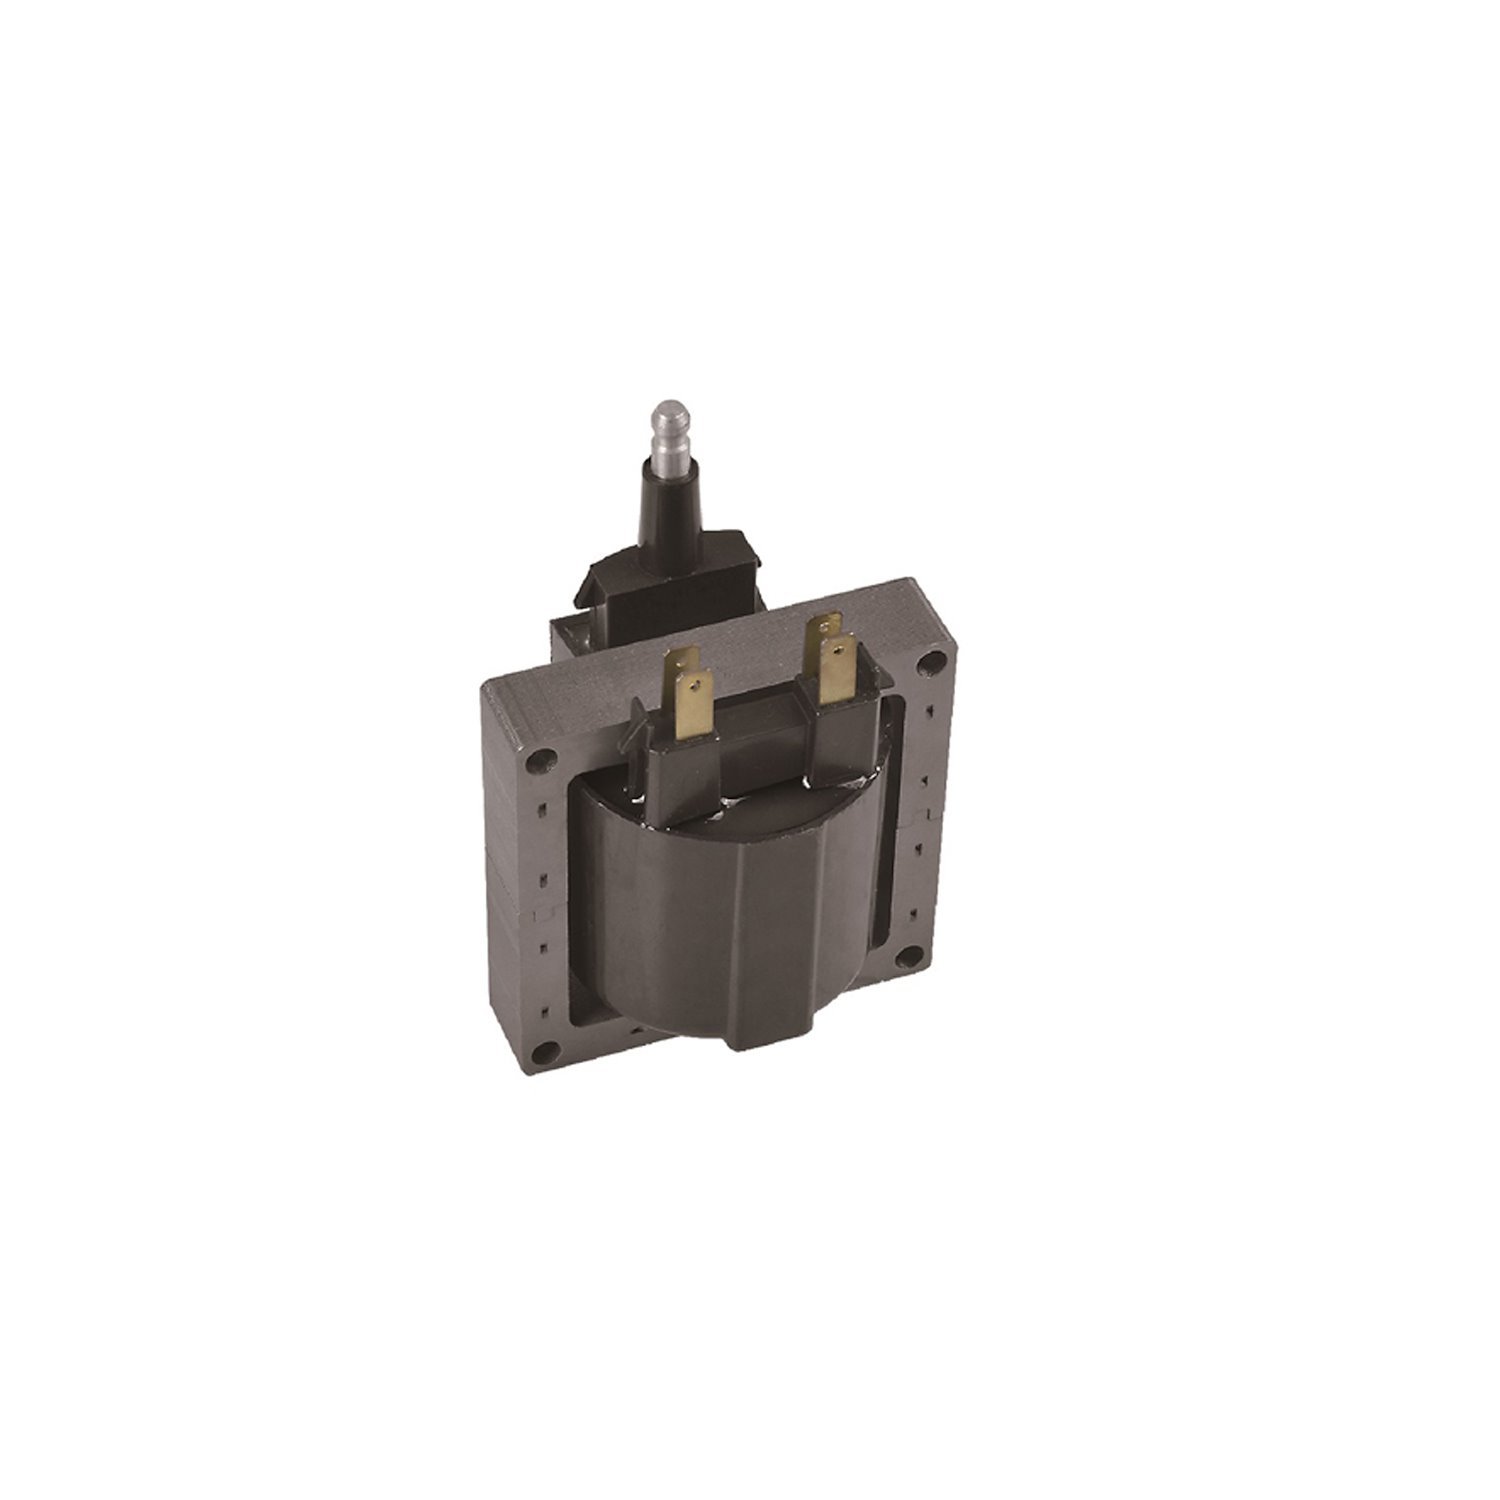 OE Replacement Ignition Coil for 1975-1984 Buick, Chevrolet, GMC, Jeep, Oldsmobile, Pontiac